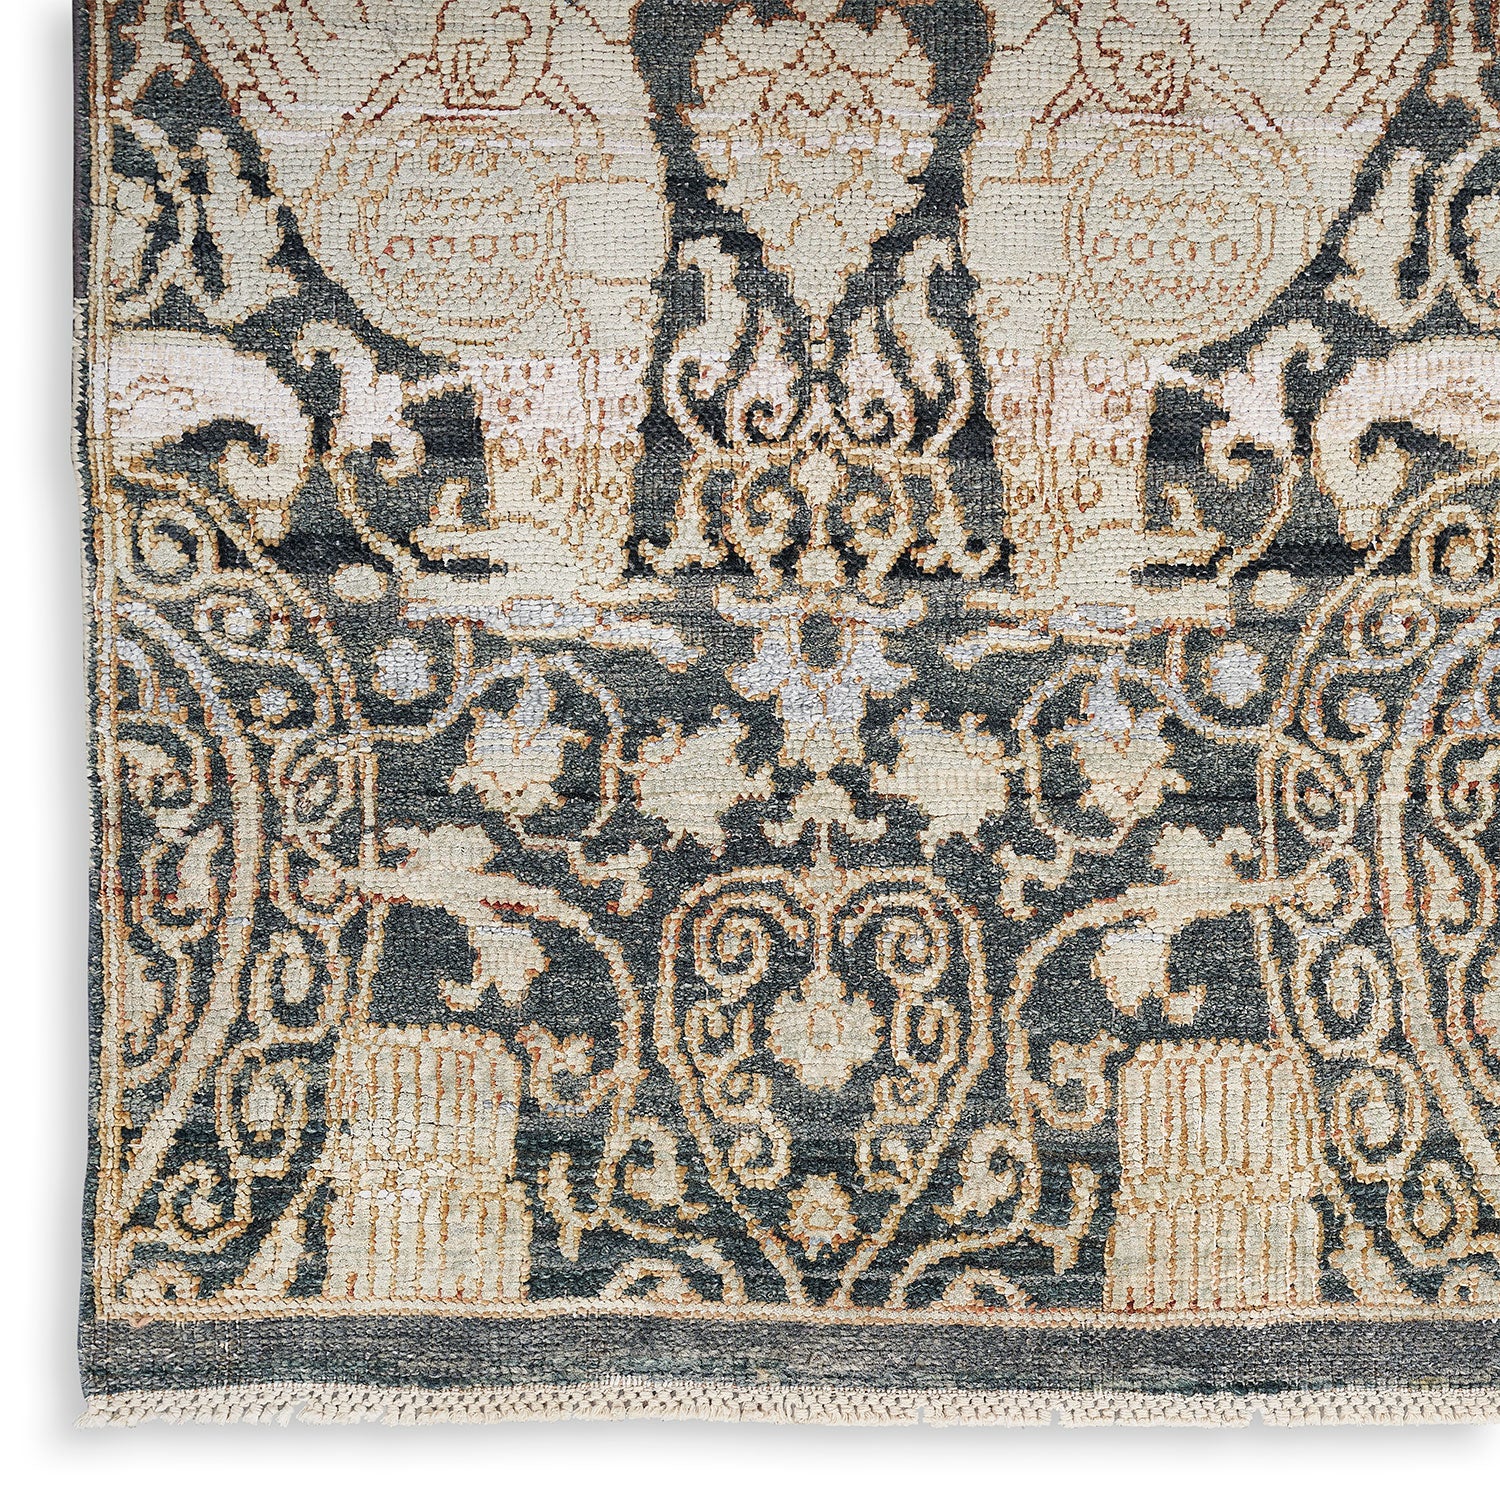 Intricate Middle Eastern-inspired rug showcases symmetrical design and exquisite craftsmanship.